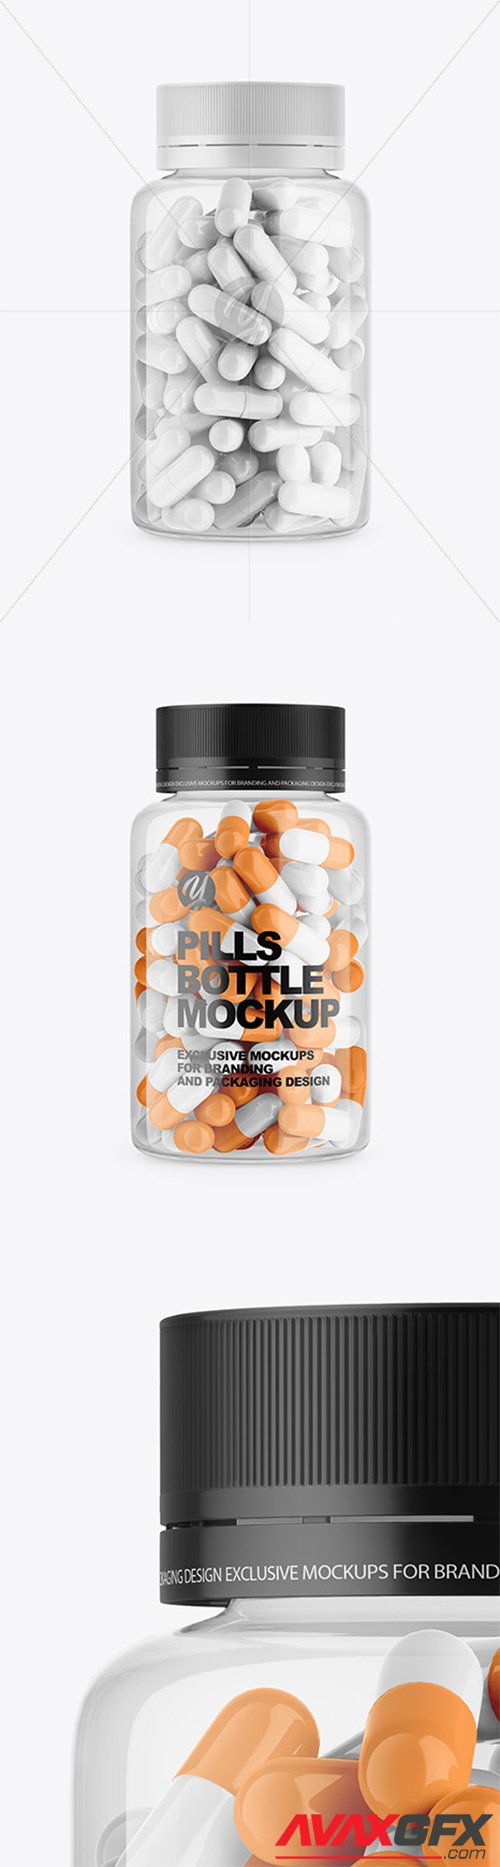 Clear Plastiс Bottle With Pills Mockup 60105